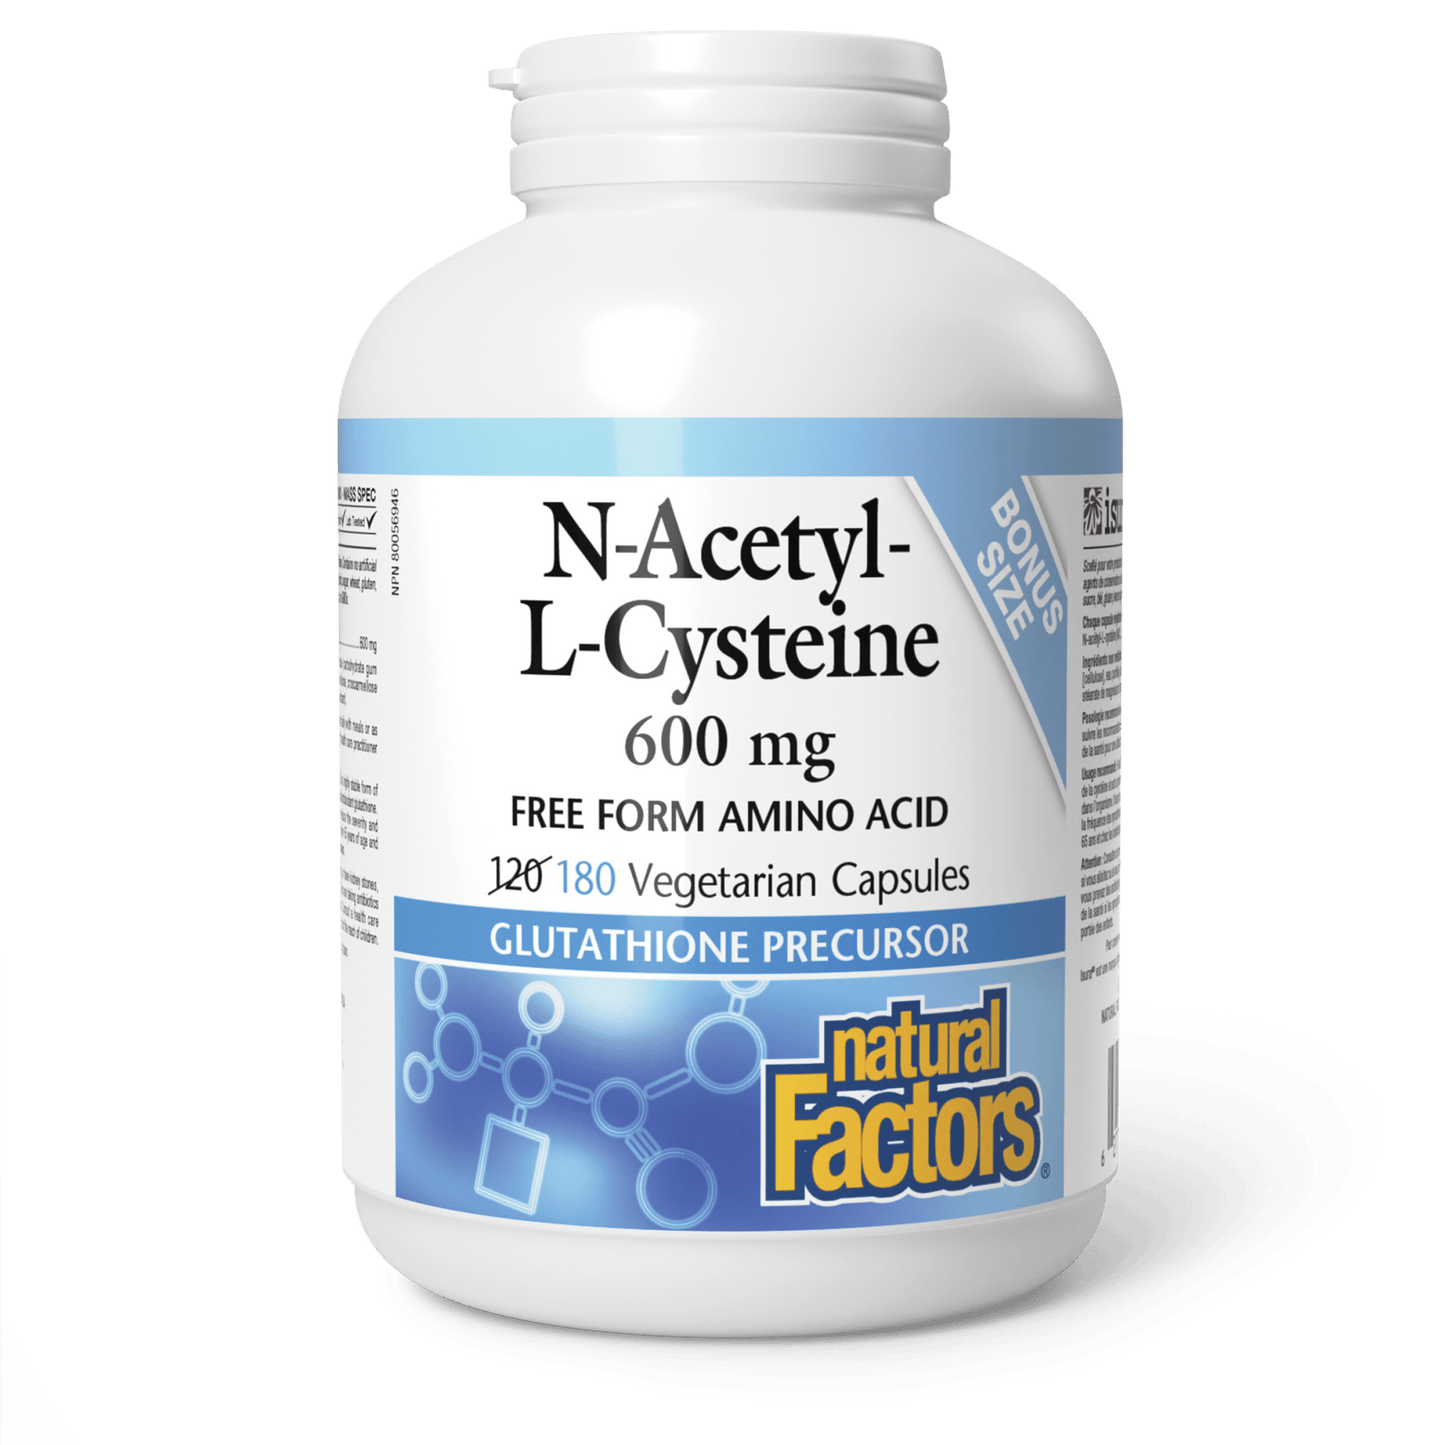 N-Acetyl-L-Cysteine 600 mg, Natural Factors|v|image|8003